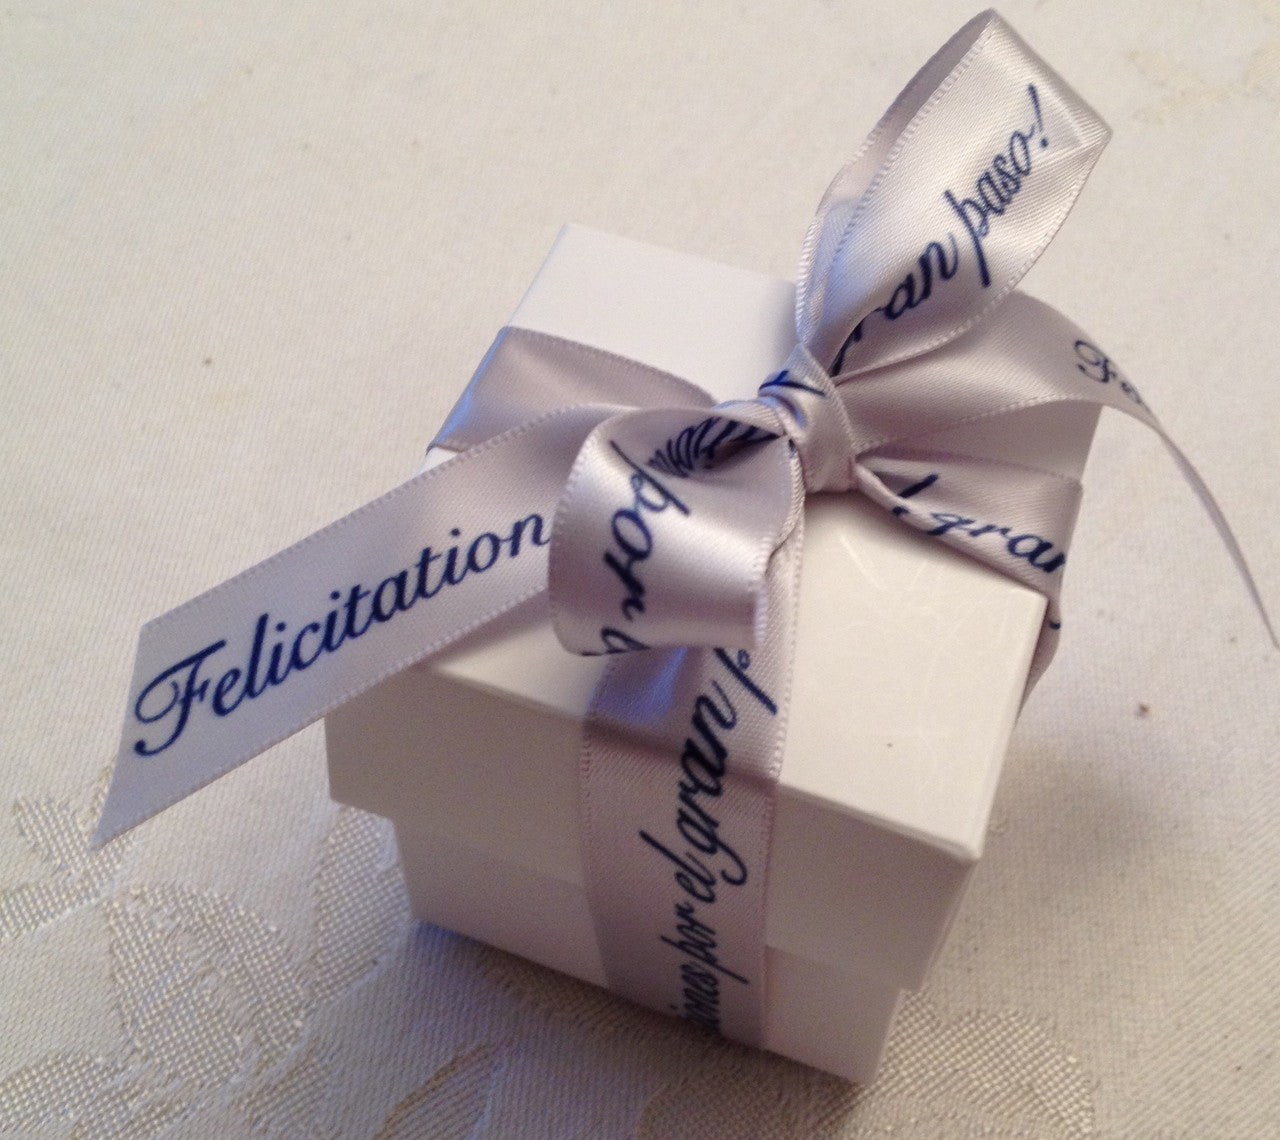 This beautiful expression of good wishes in Spanish looks so pretty tied on our favor box!